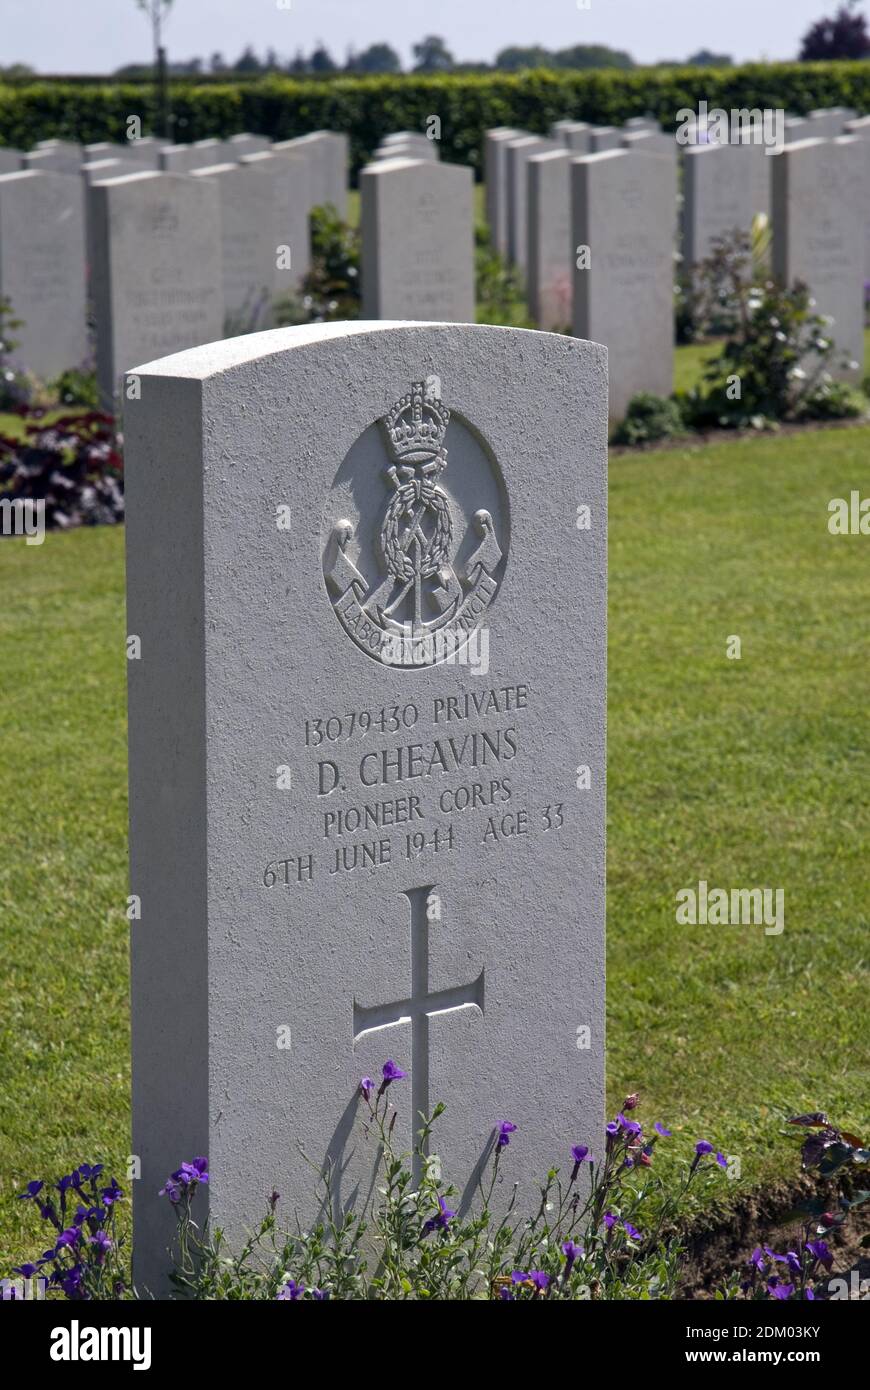 Grave of a British soldier killed on D-Day (June 6, 1944) at the Bayeux Commonwealth War Graves Commission Cemetery, Bayeux, France. Foto Stock